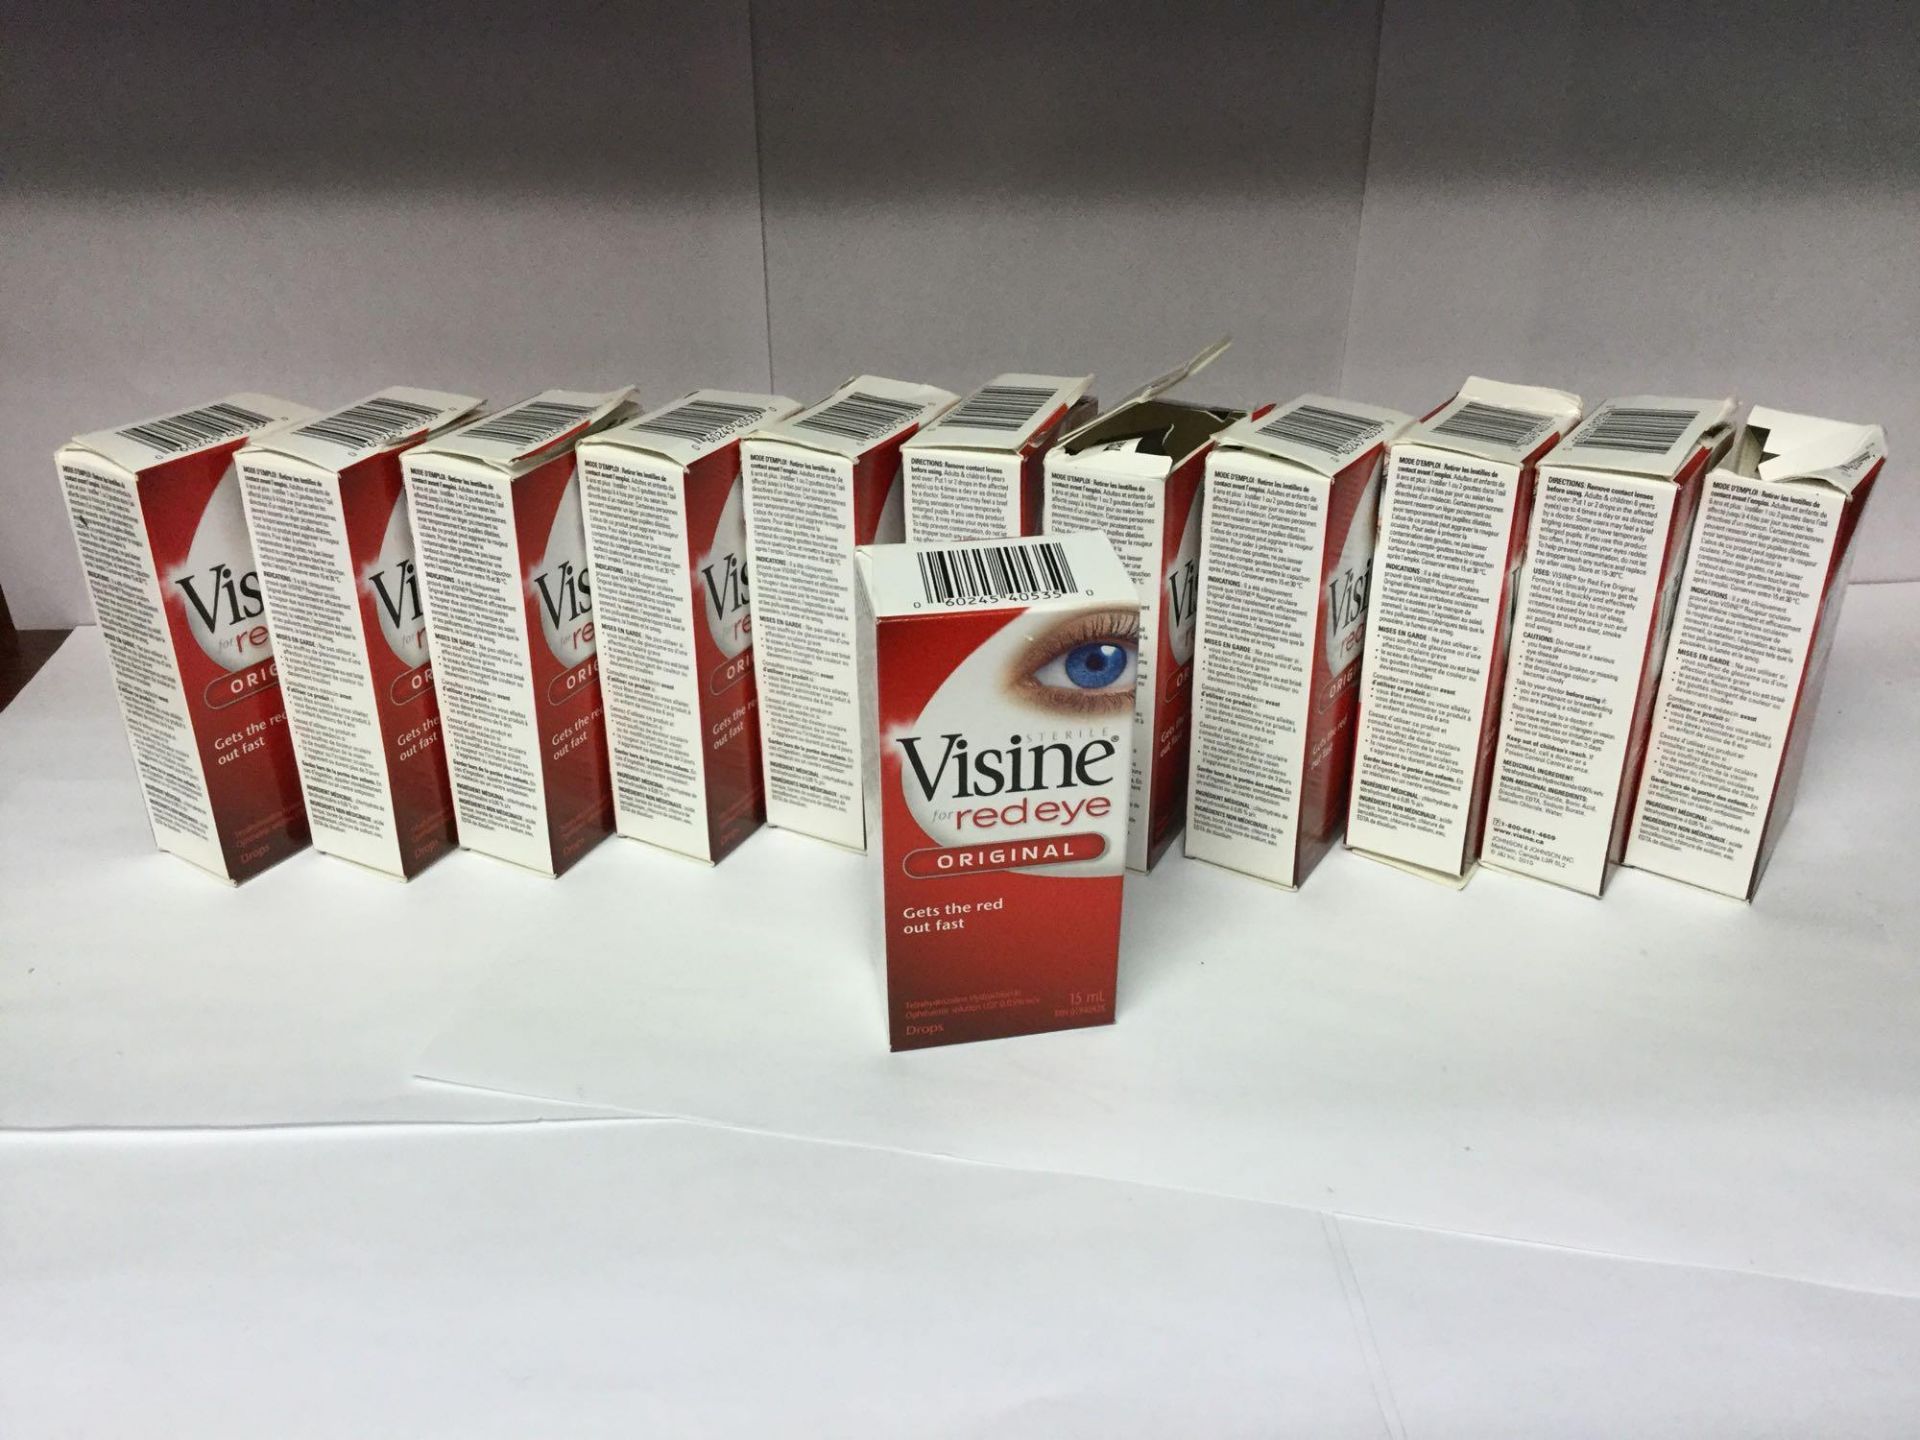 Lot of 12 x 15 mL Vision for Red Eye Drops - Original